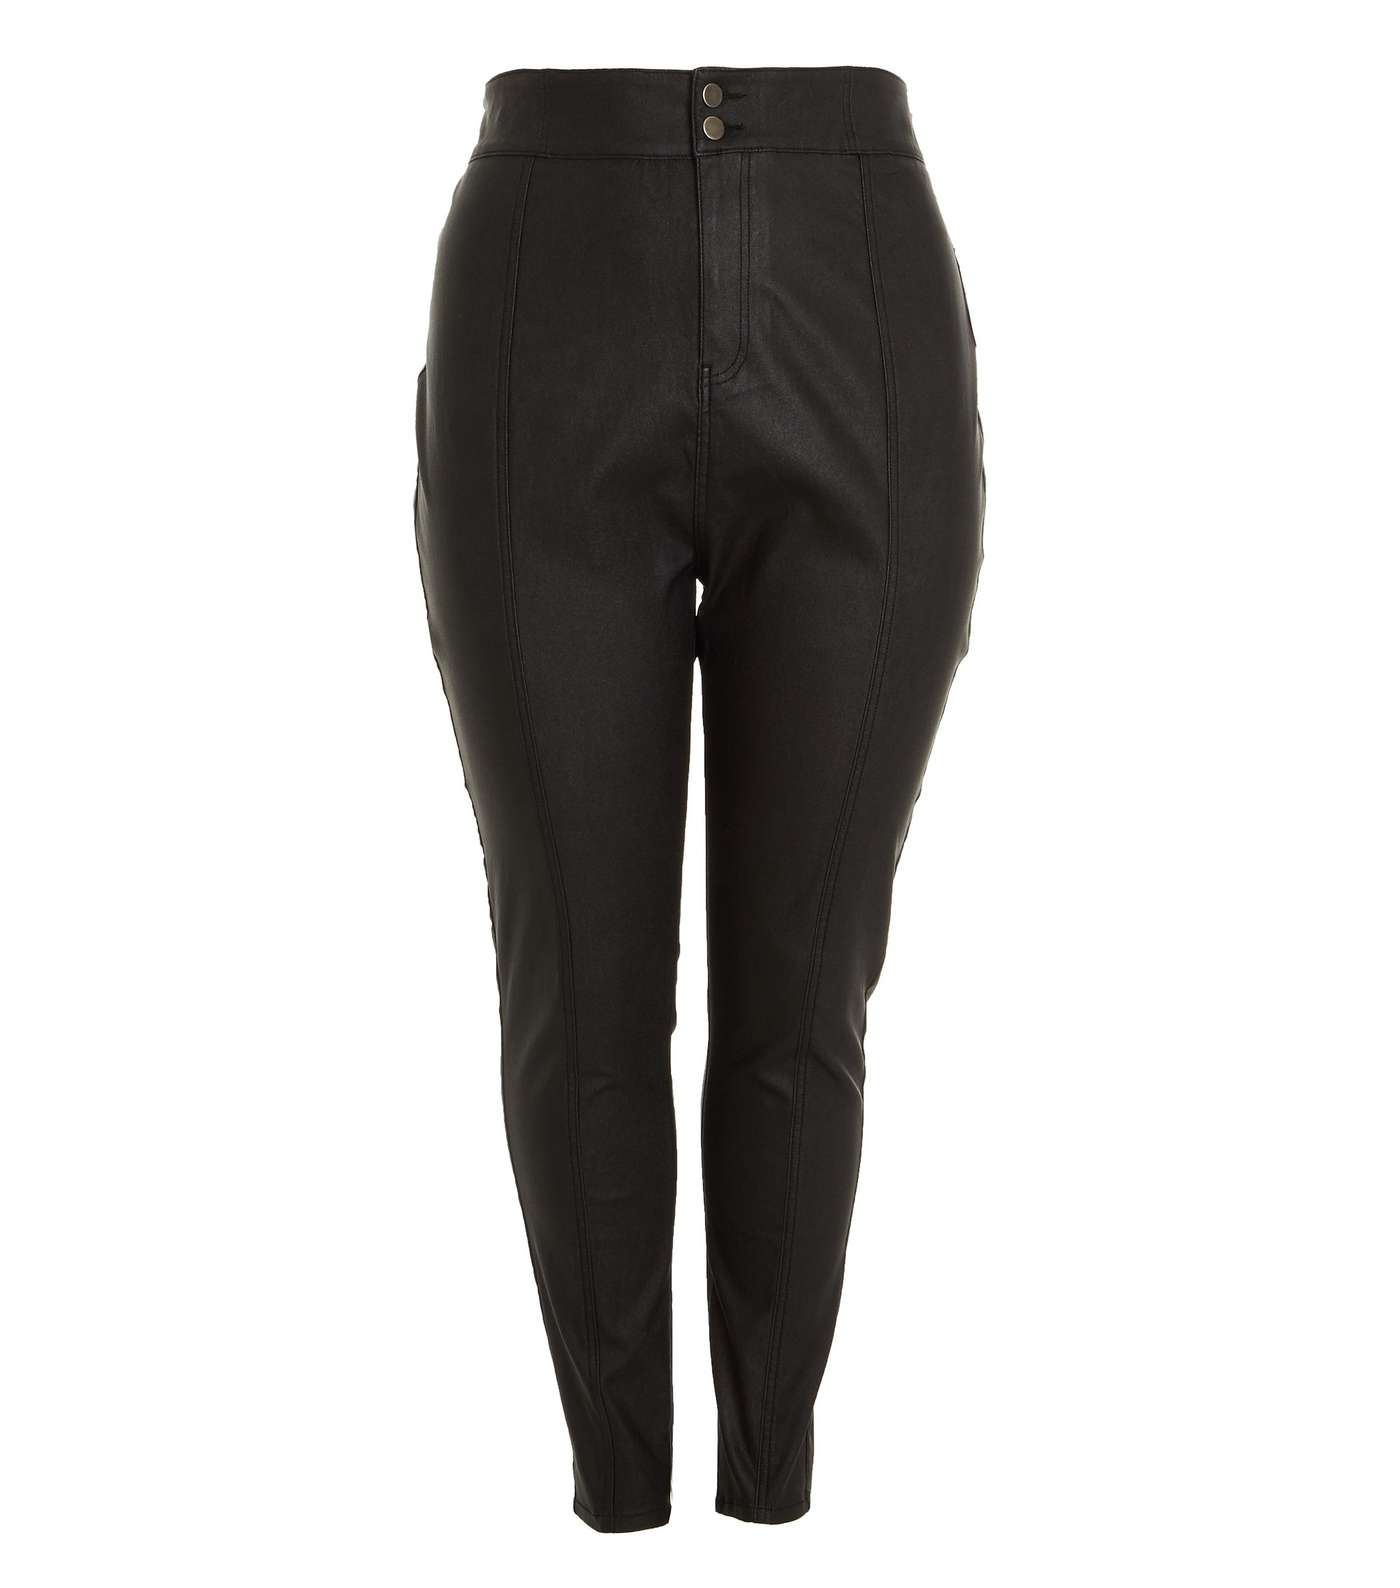 QUIZ Black Leather-Look High Waist Trousers Image 4